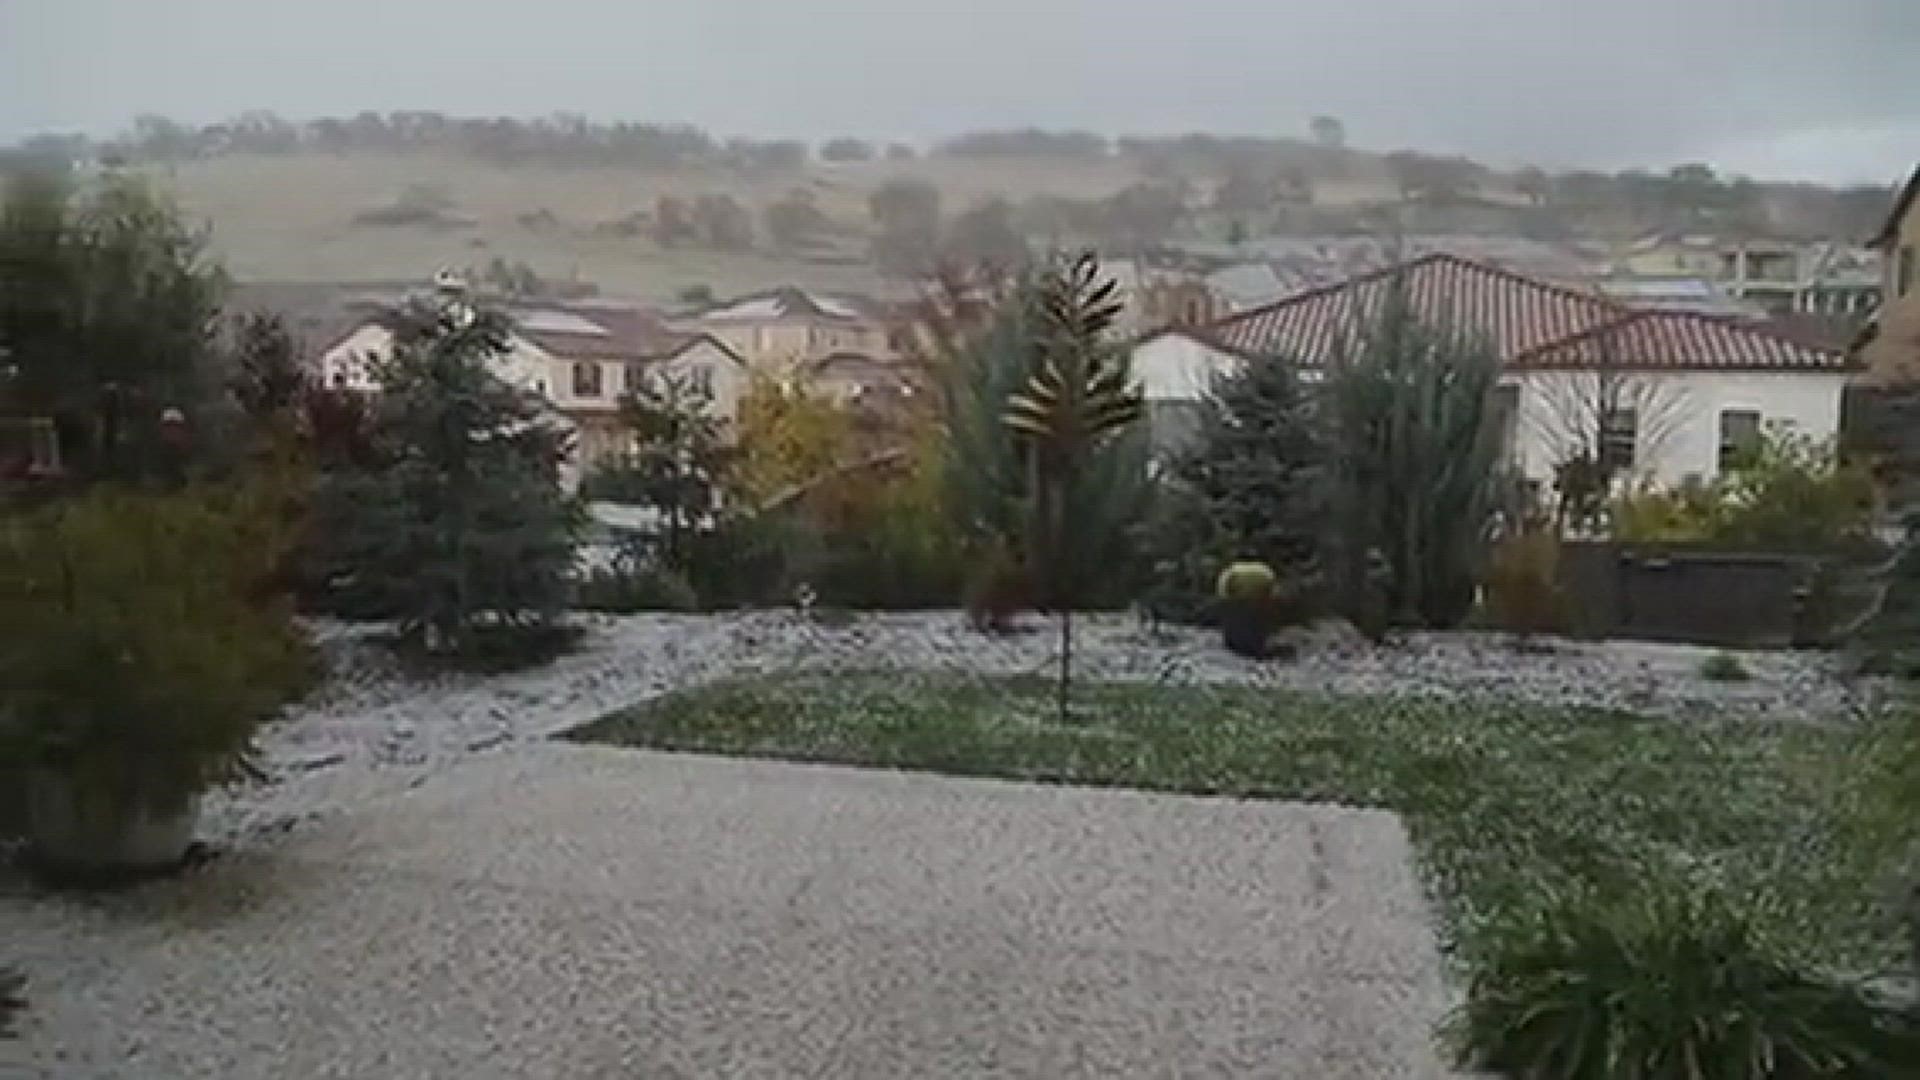 Hail in El Dorado Hills on Dec. 11 (from Cole H.)
Credit: Cole H